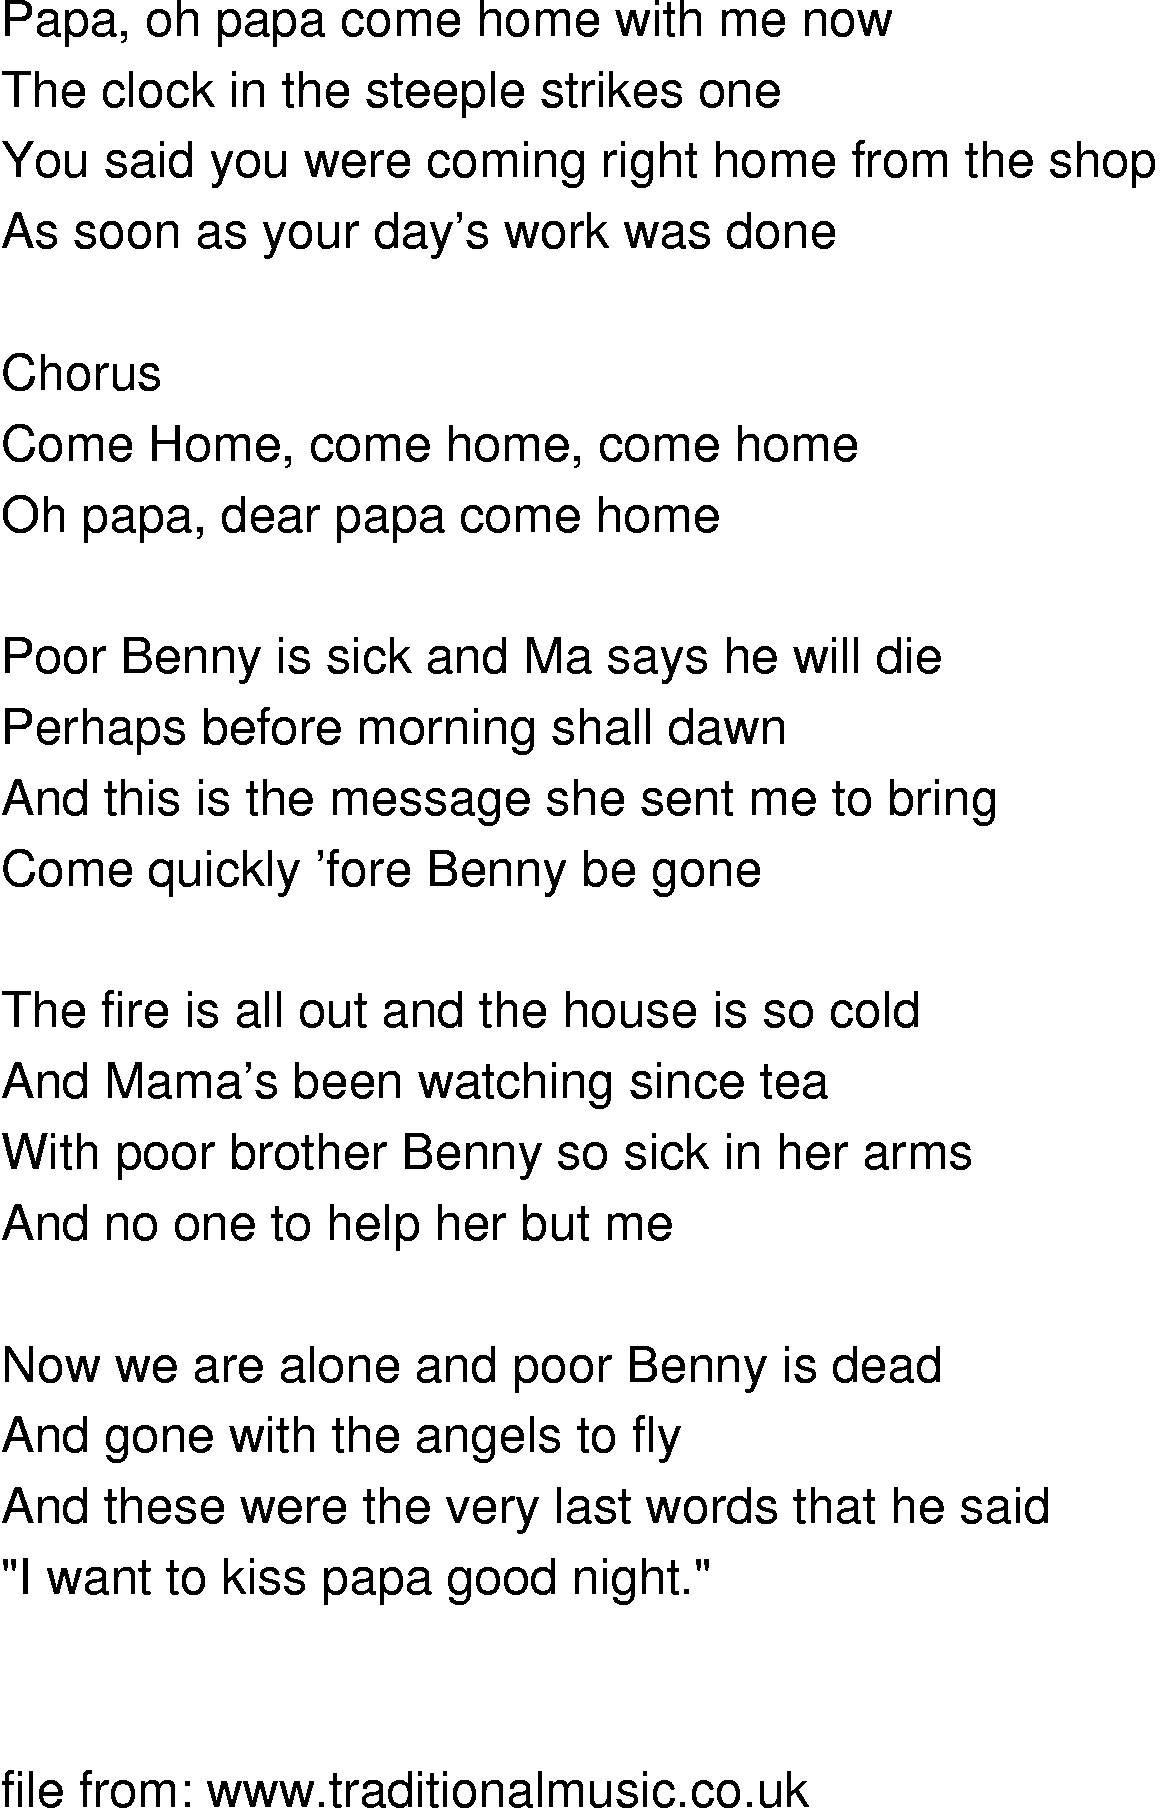 Old-Time (oldtimey) Song Lyrics - come home